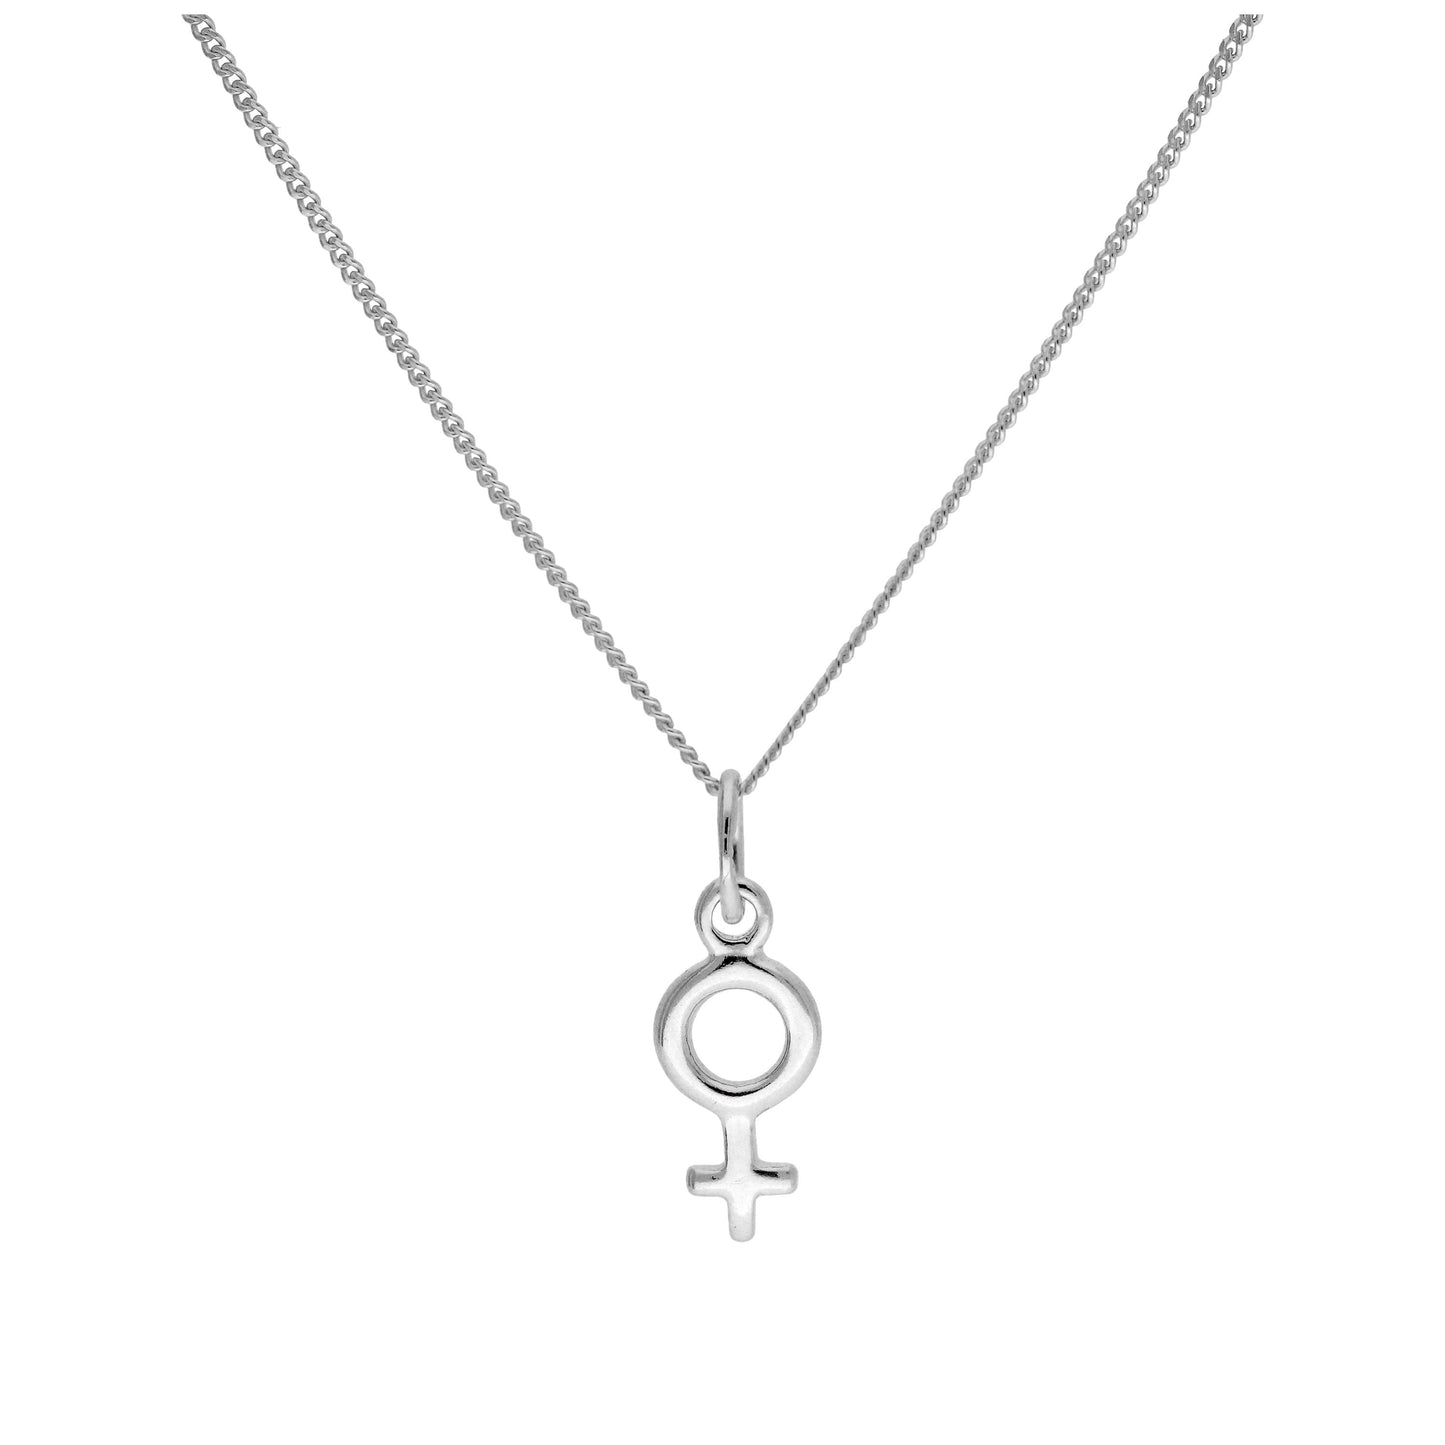 Small Sterling Silver Female Symbol Necklace 14 - 32 Inches